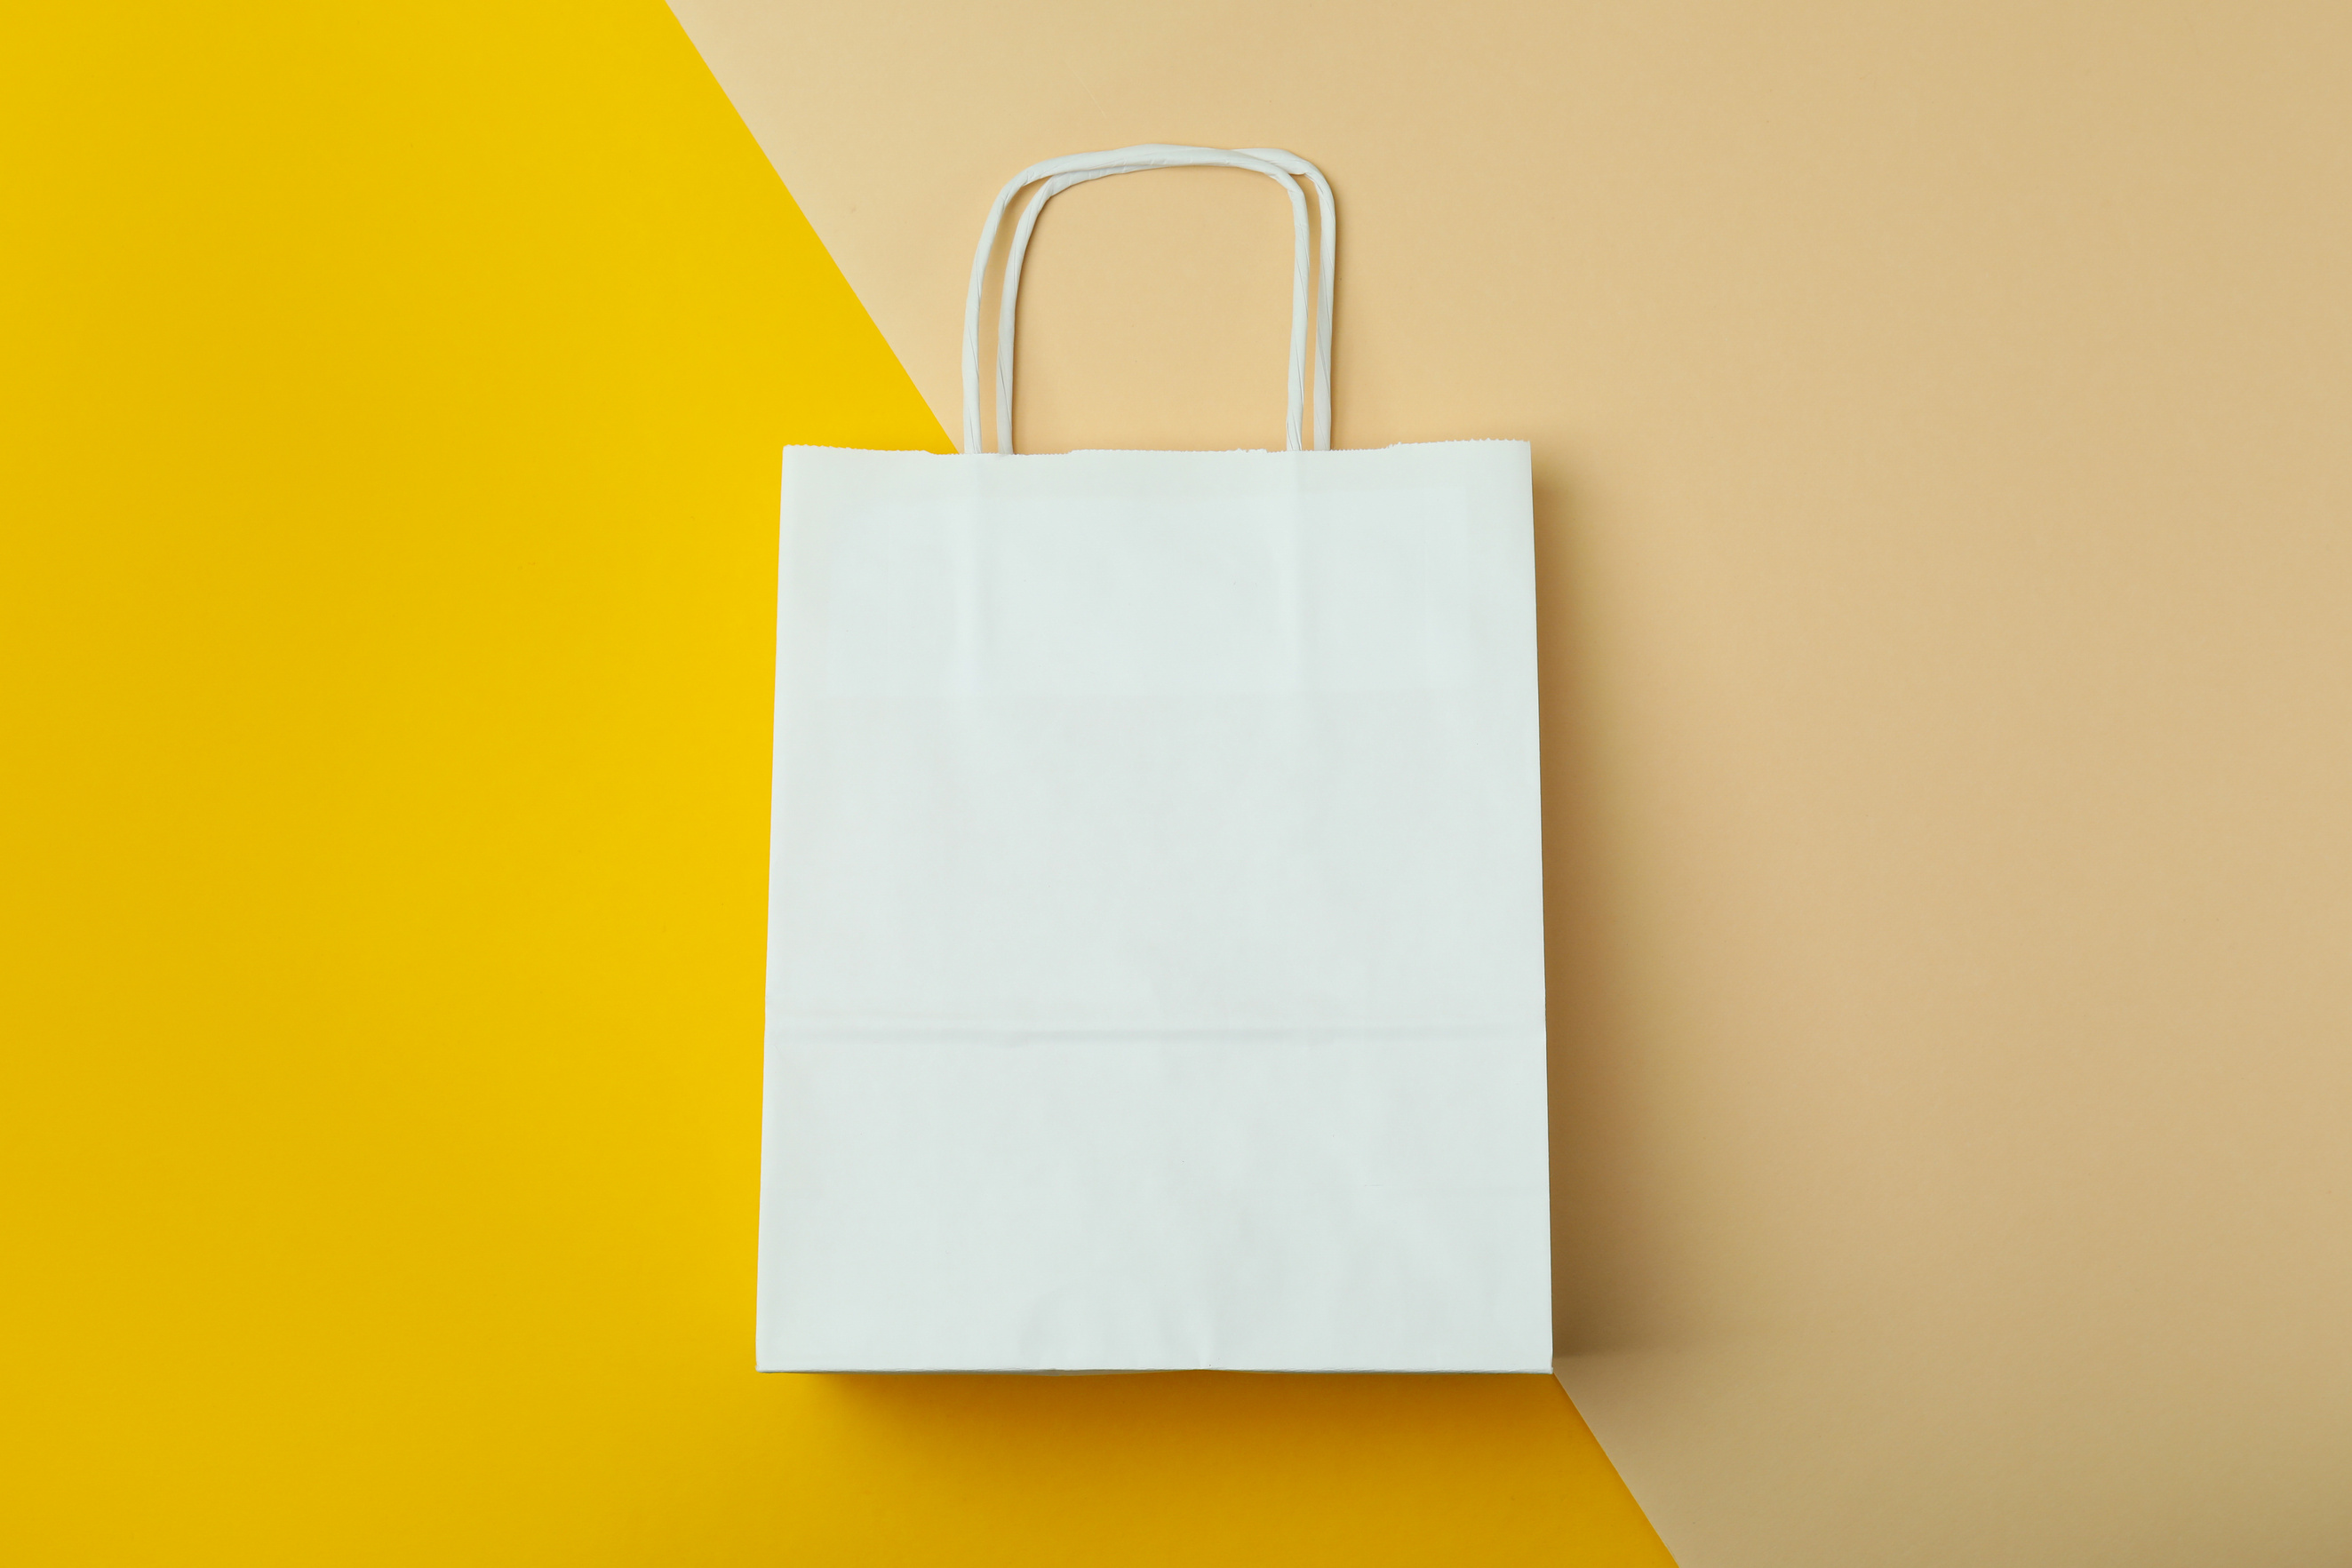 Blank paper bag on two tone background, space for text